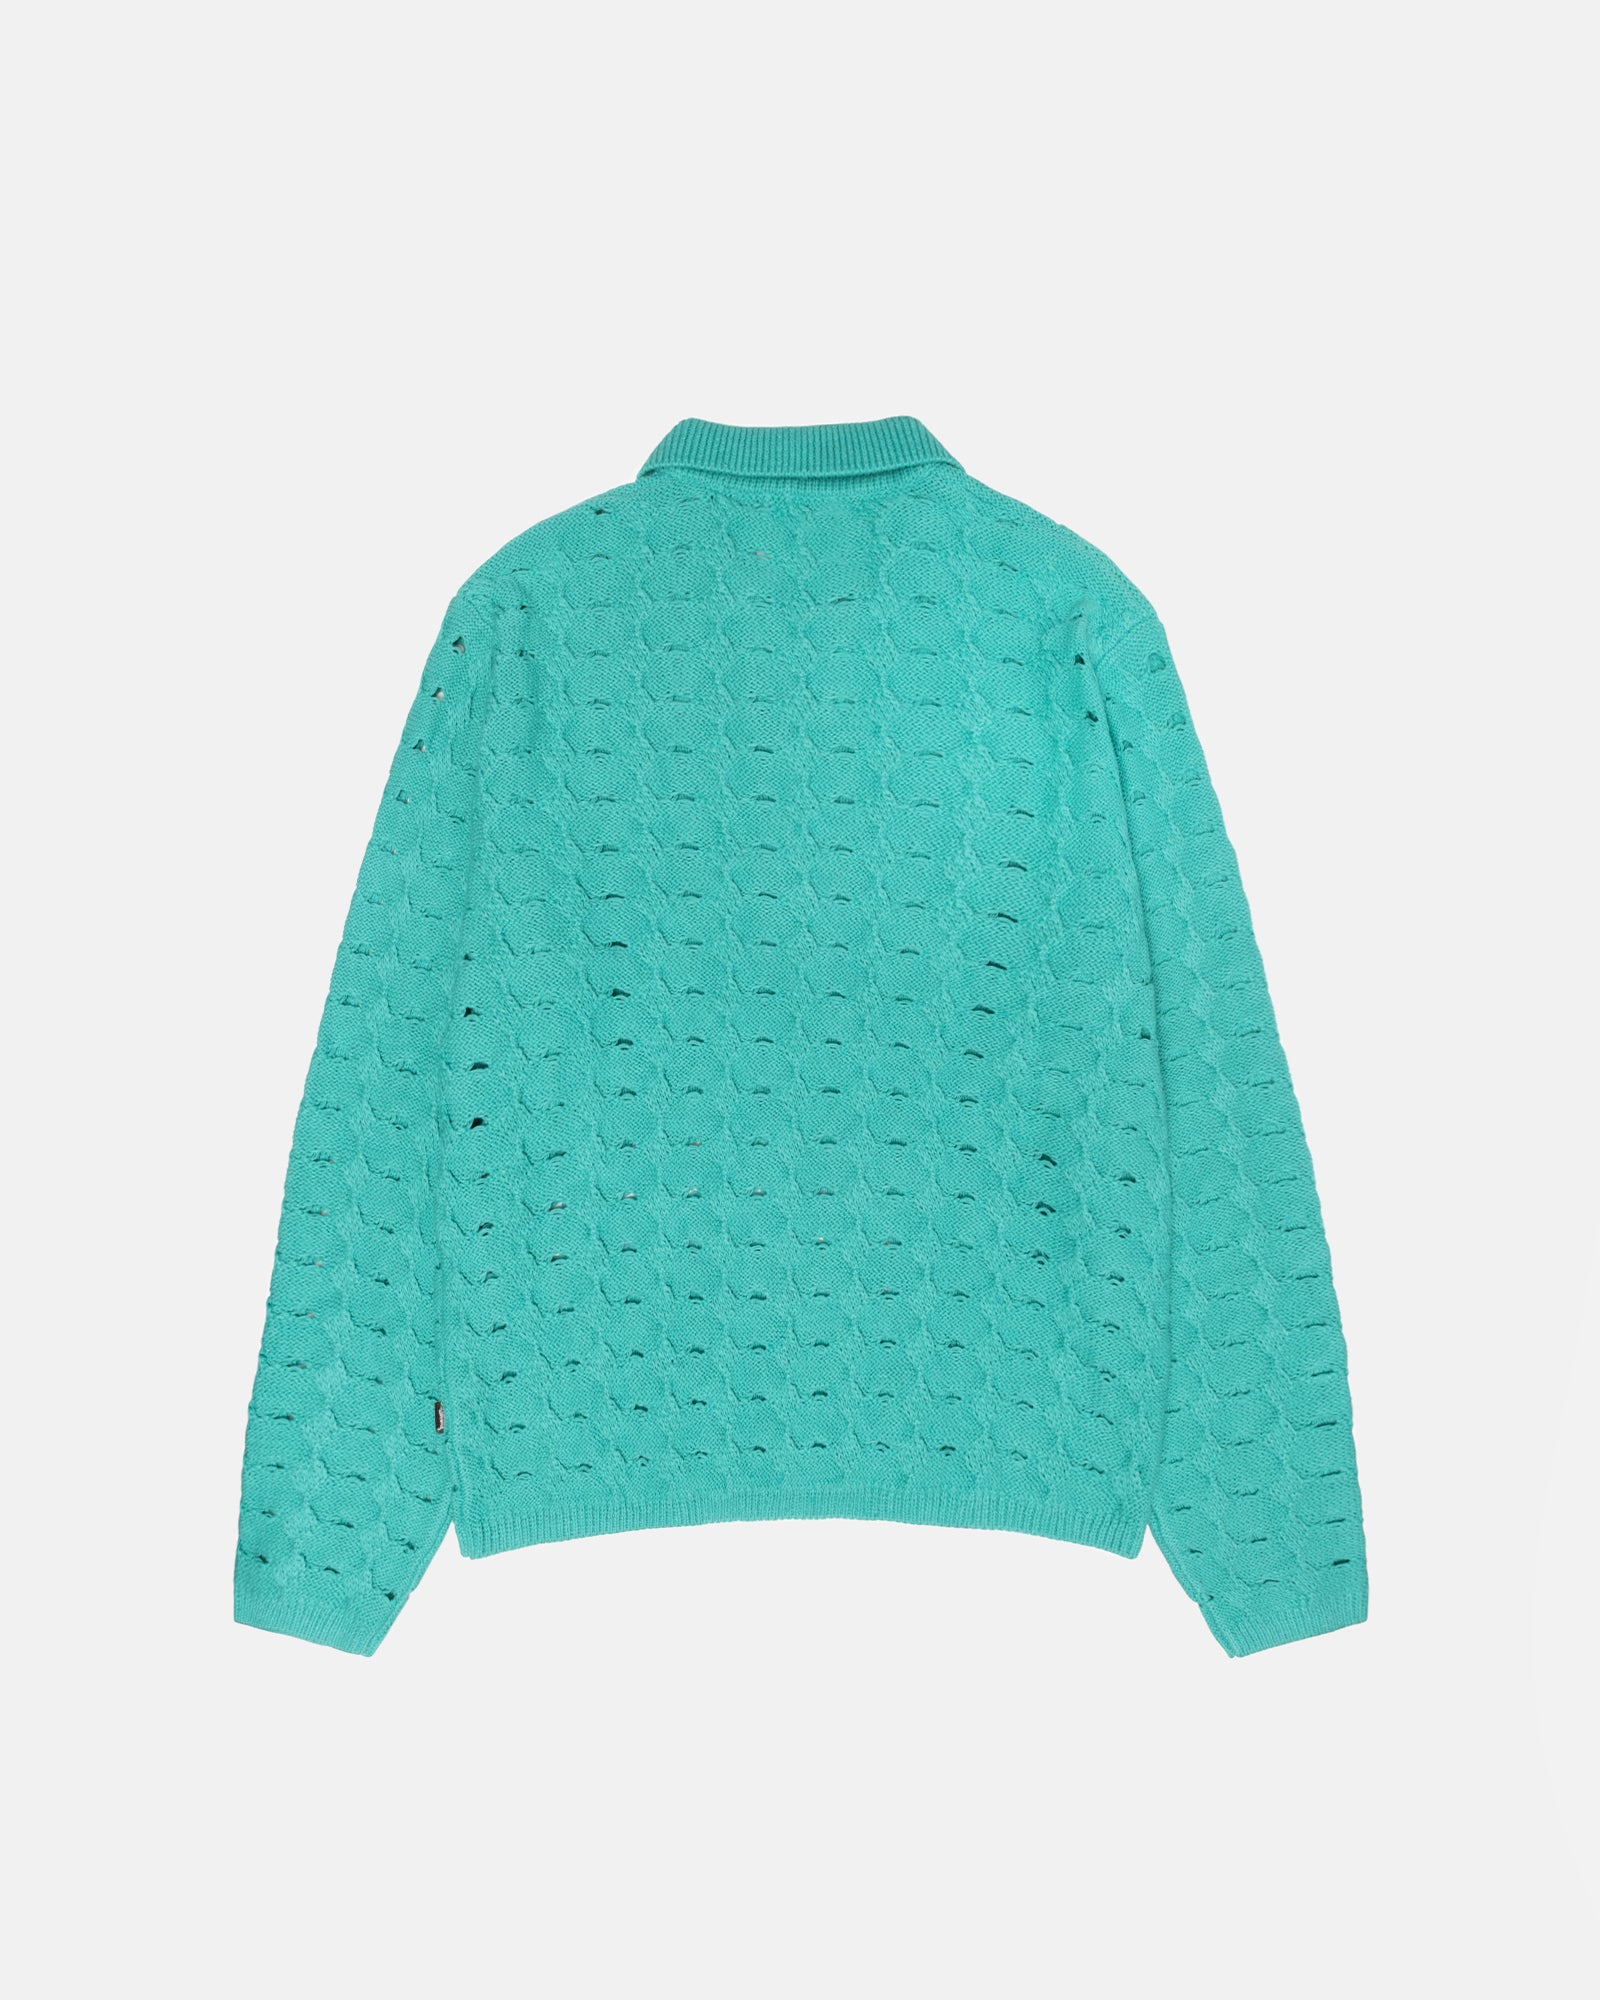 OPEN KNIT COLLARED SWEATER TEAL SWEATER